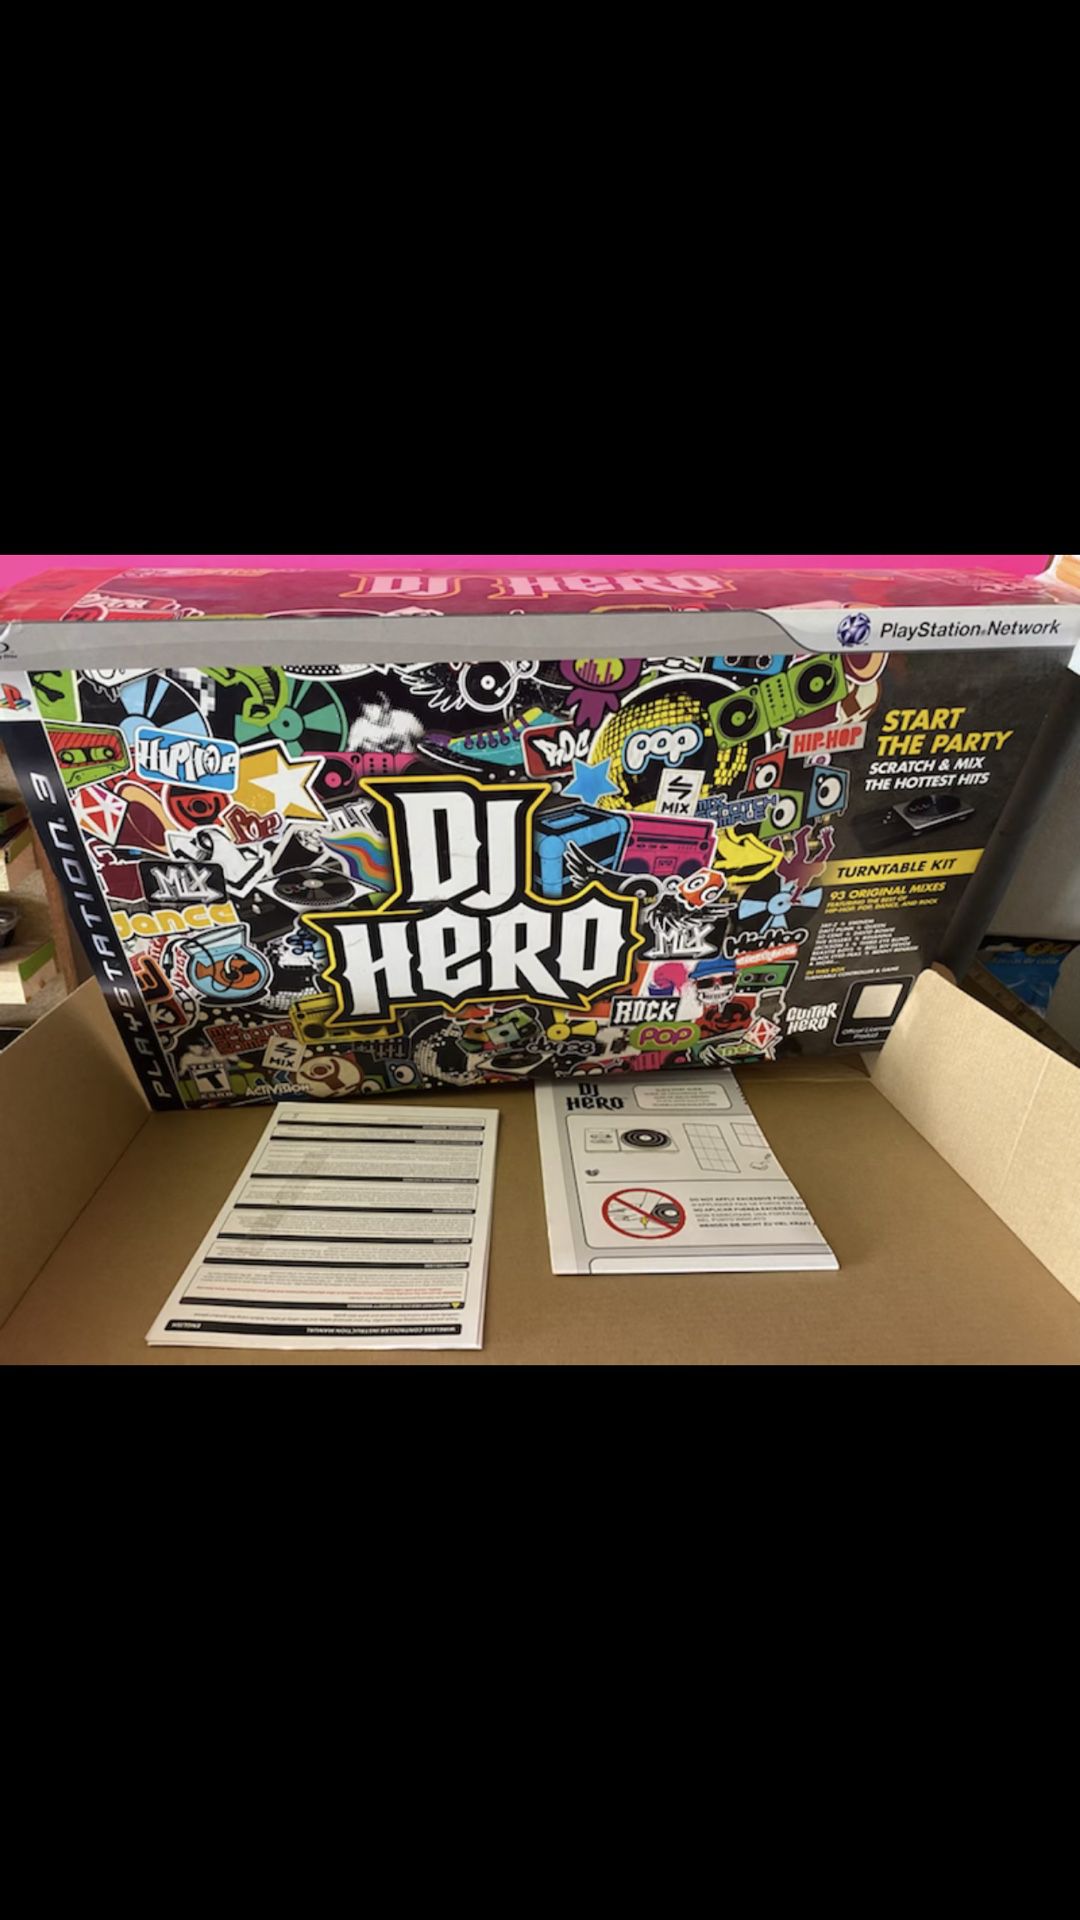 DJ Hero For Ps3